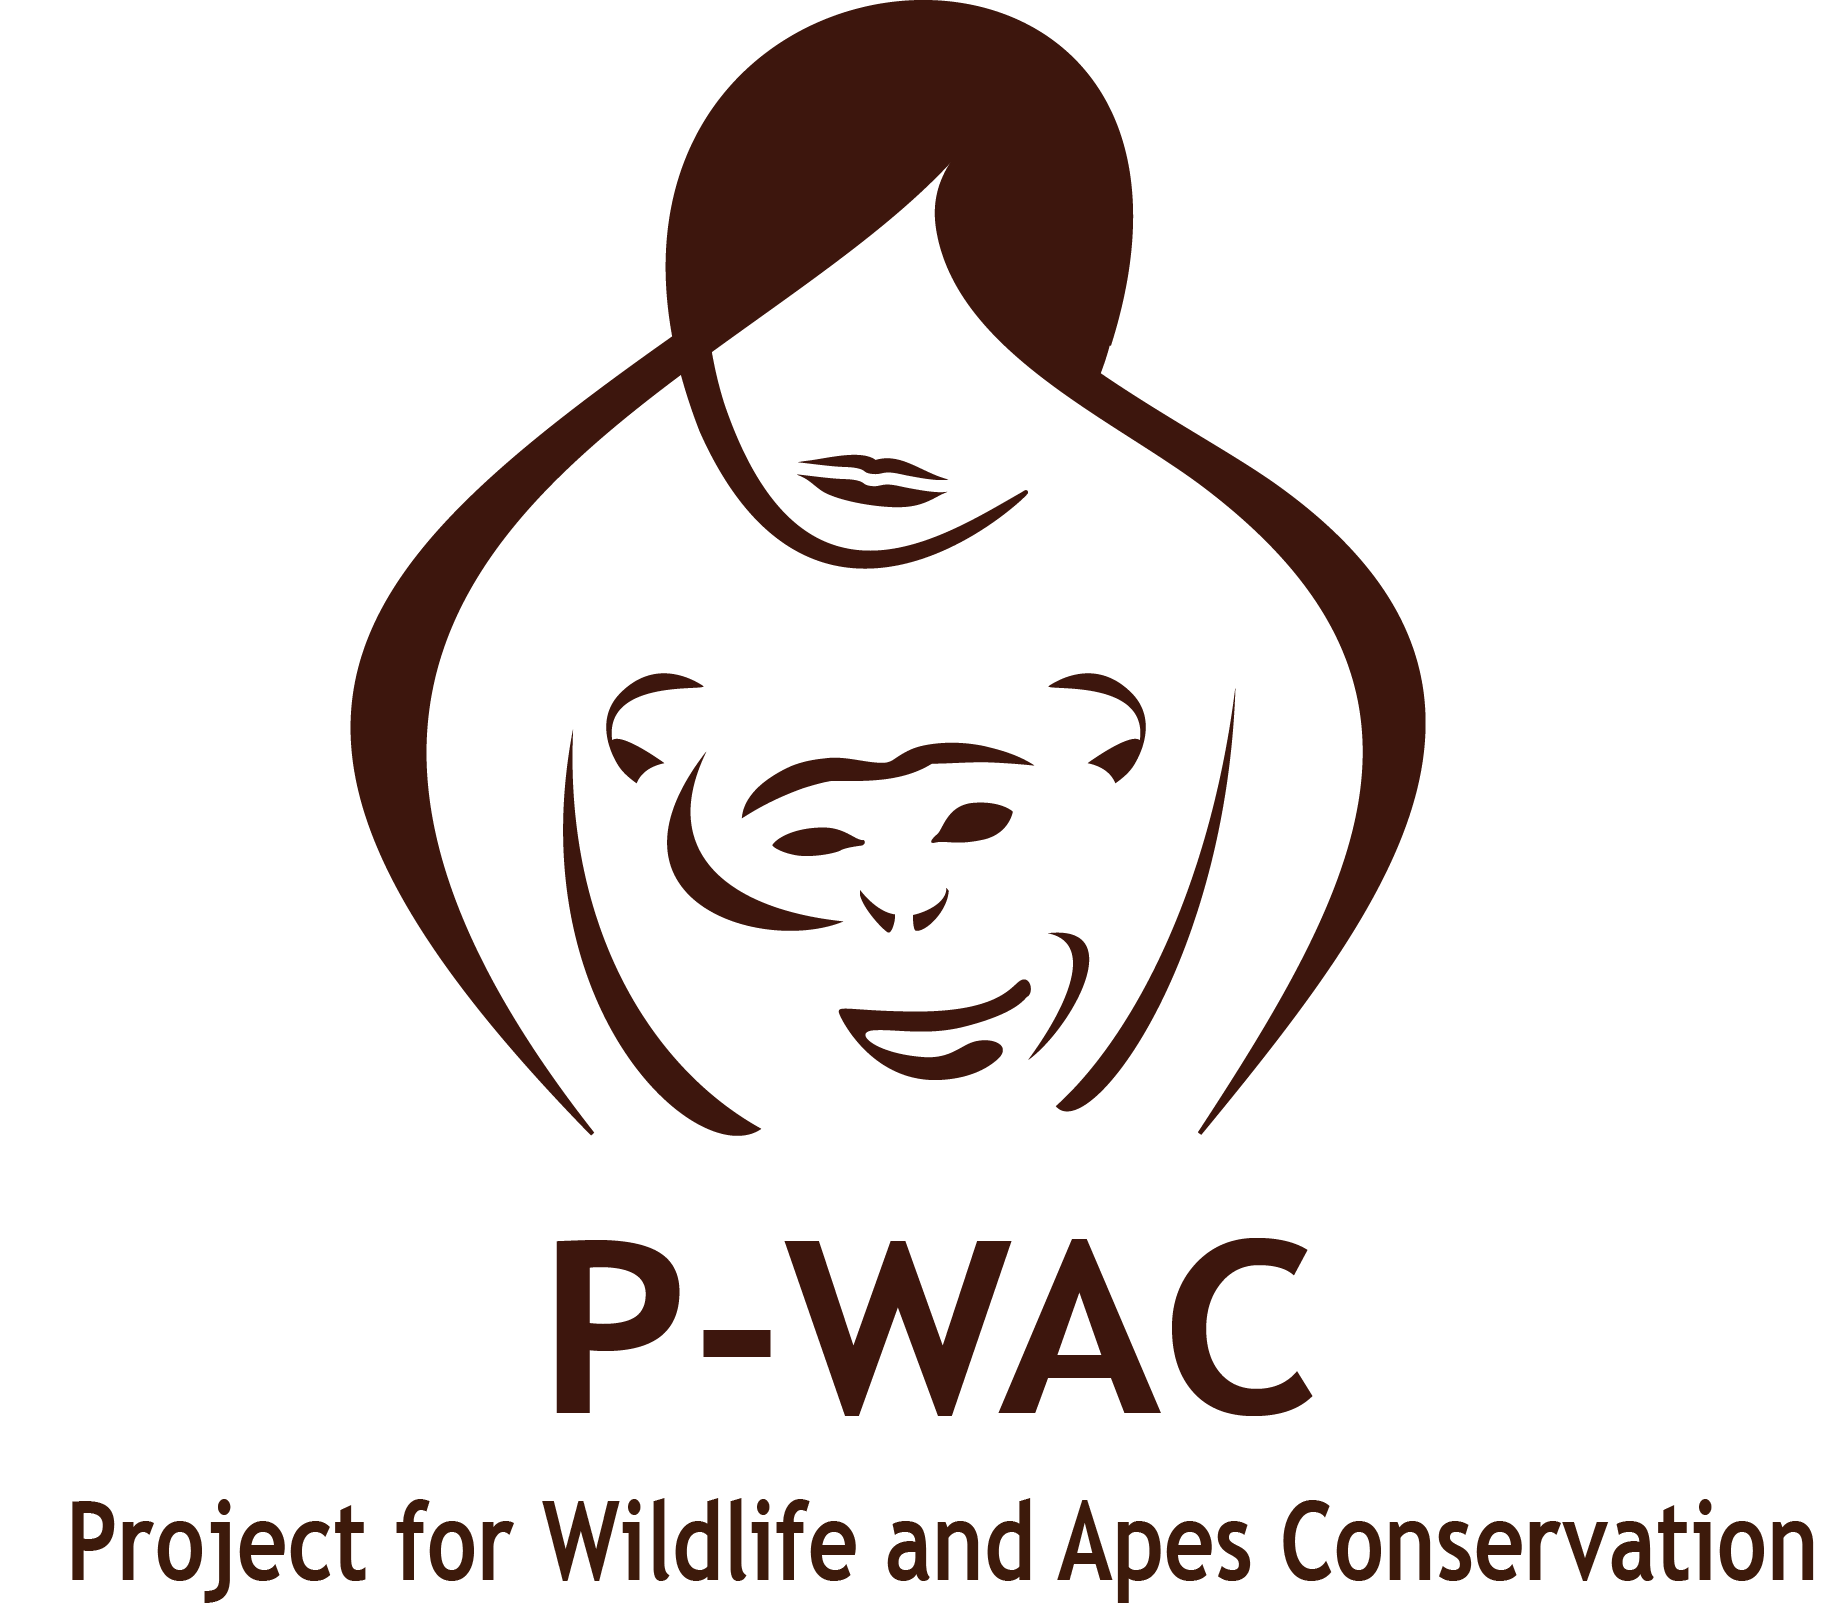 WAC Logo - What Is The Meaning Of The P WAC Logo?